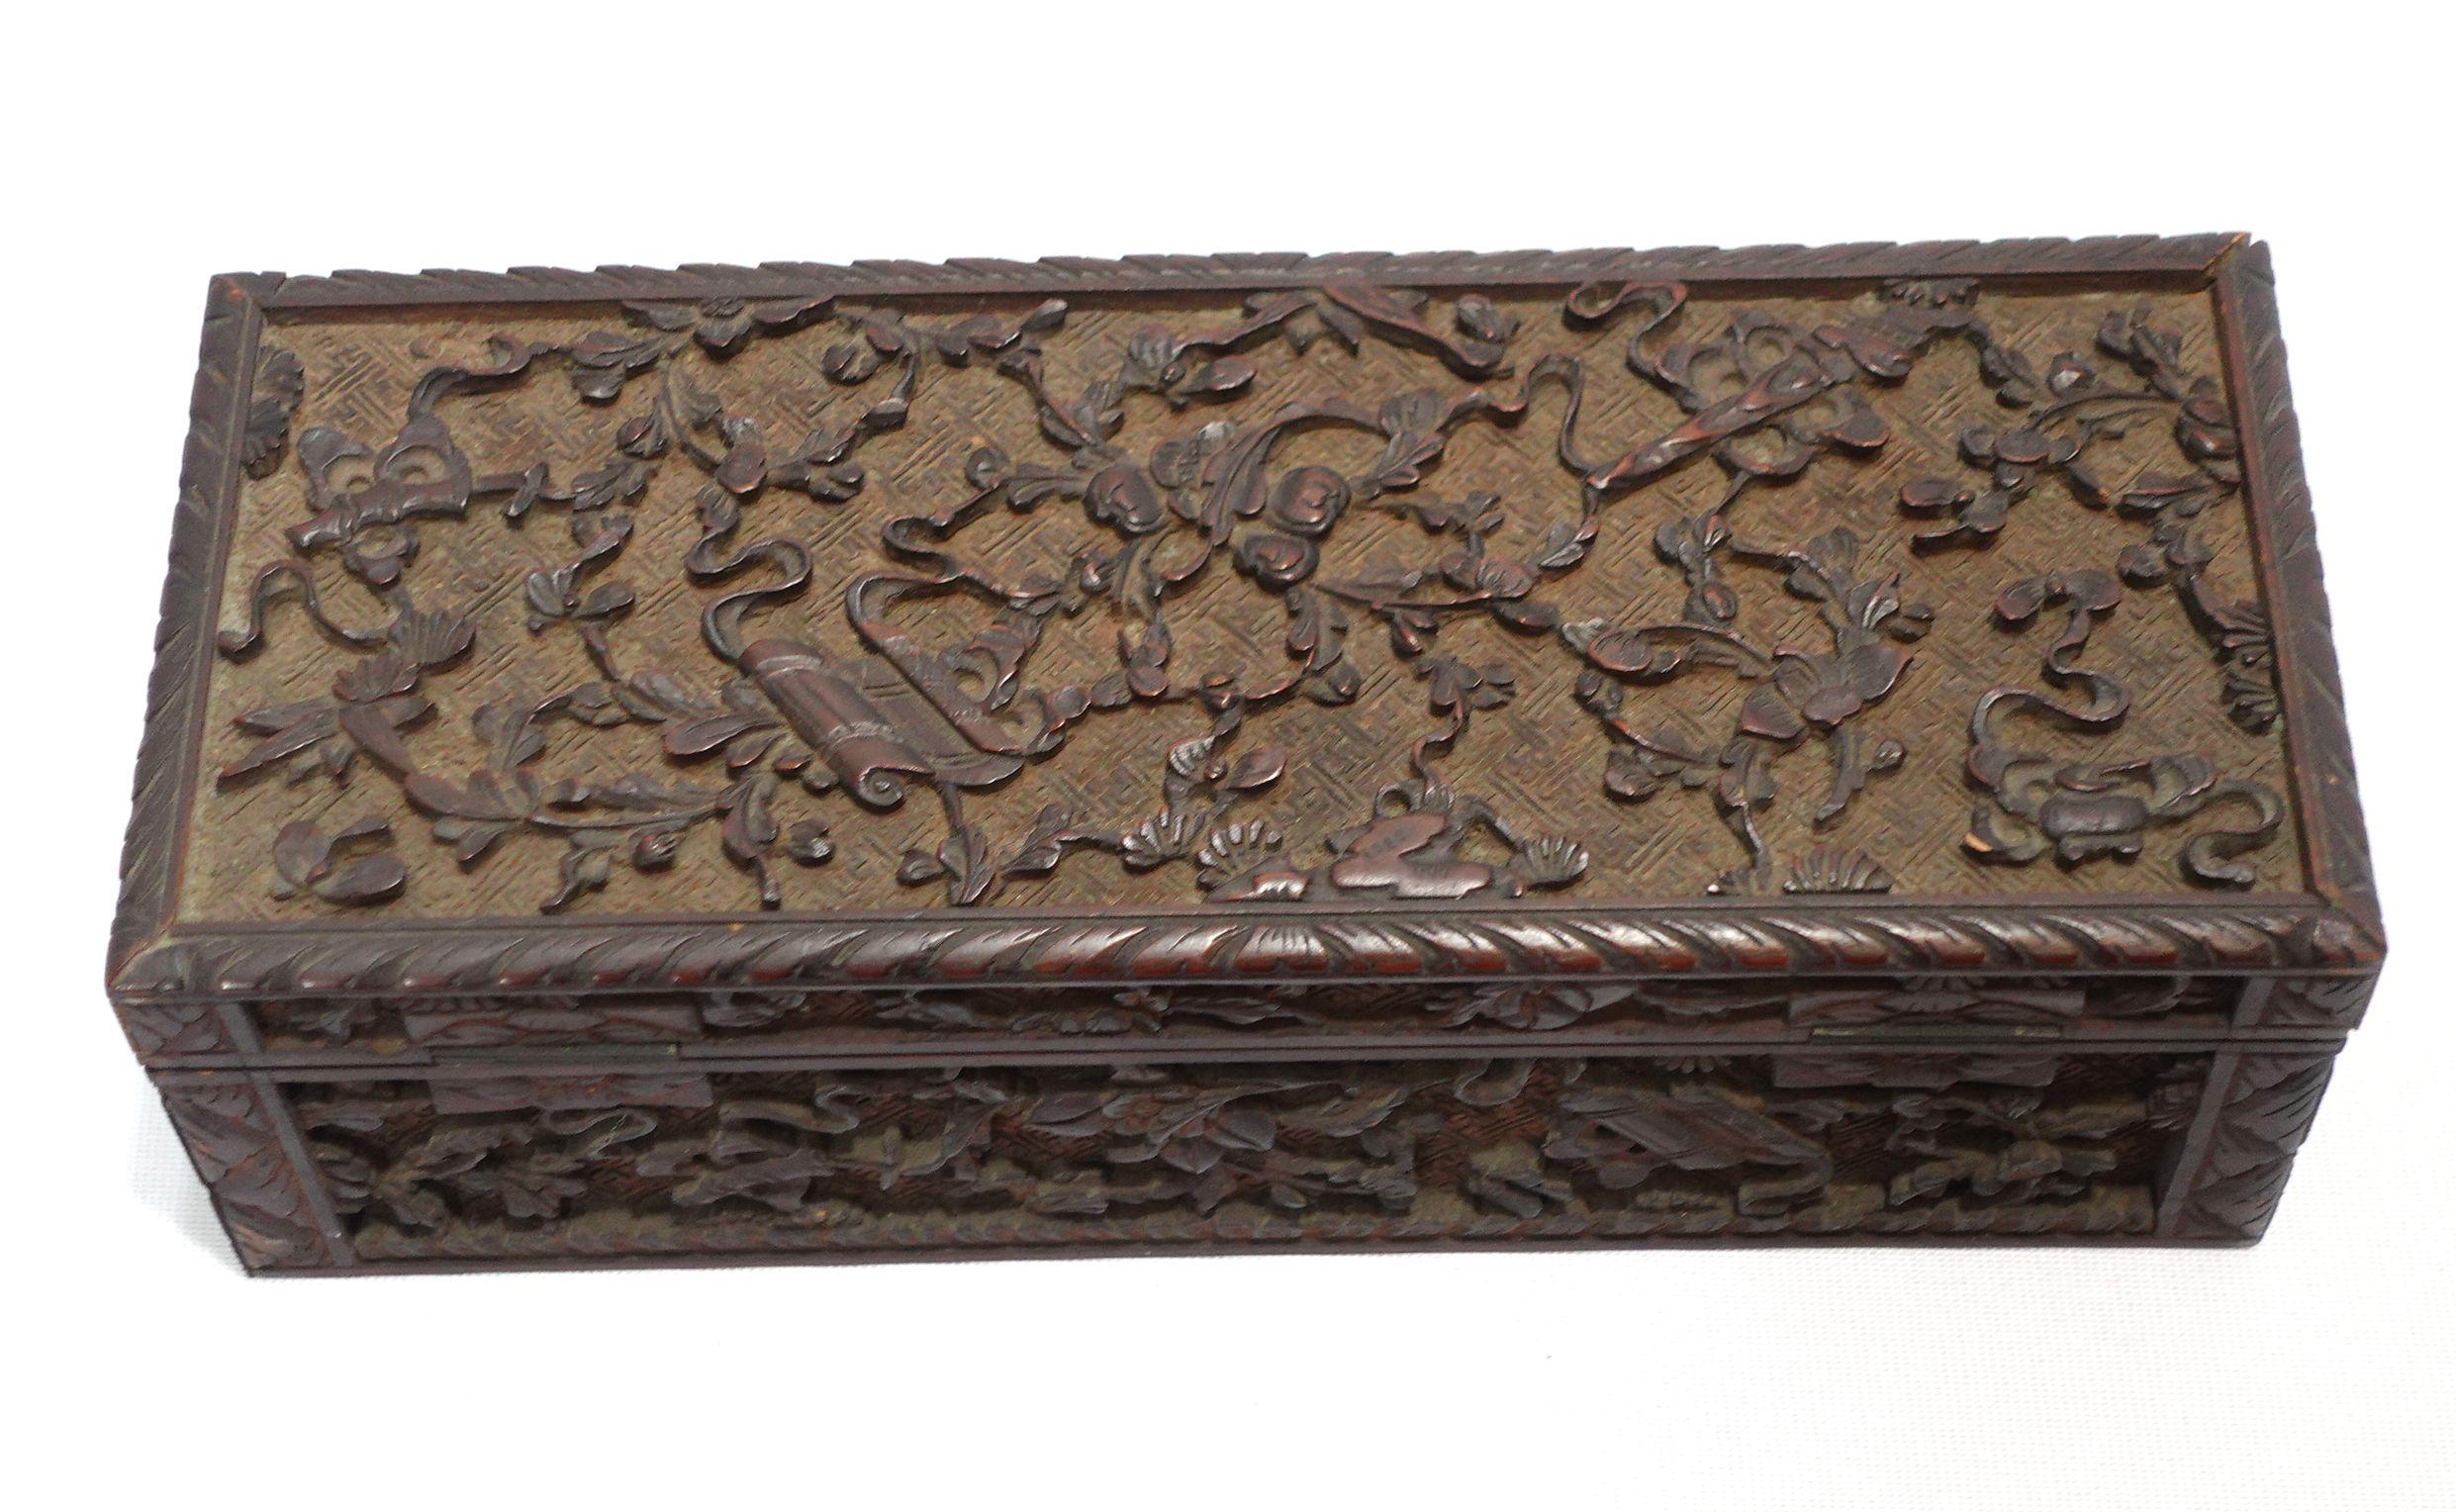 Antique Chinese Elaborately Relief Carved Glove Box W/ Original Hinges and Lock For Sale 5